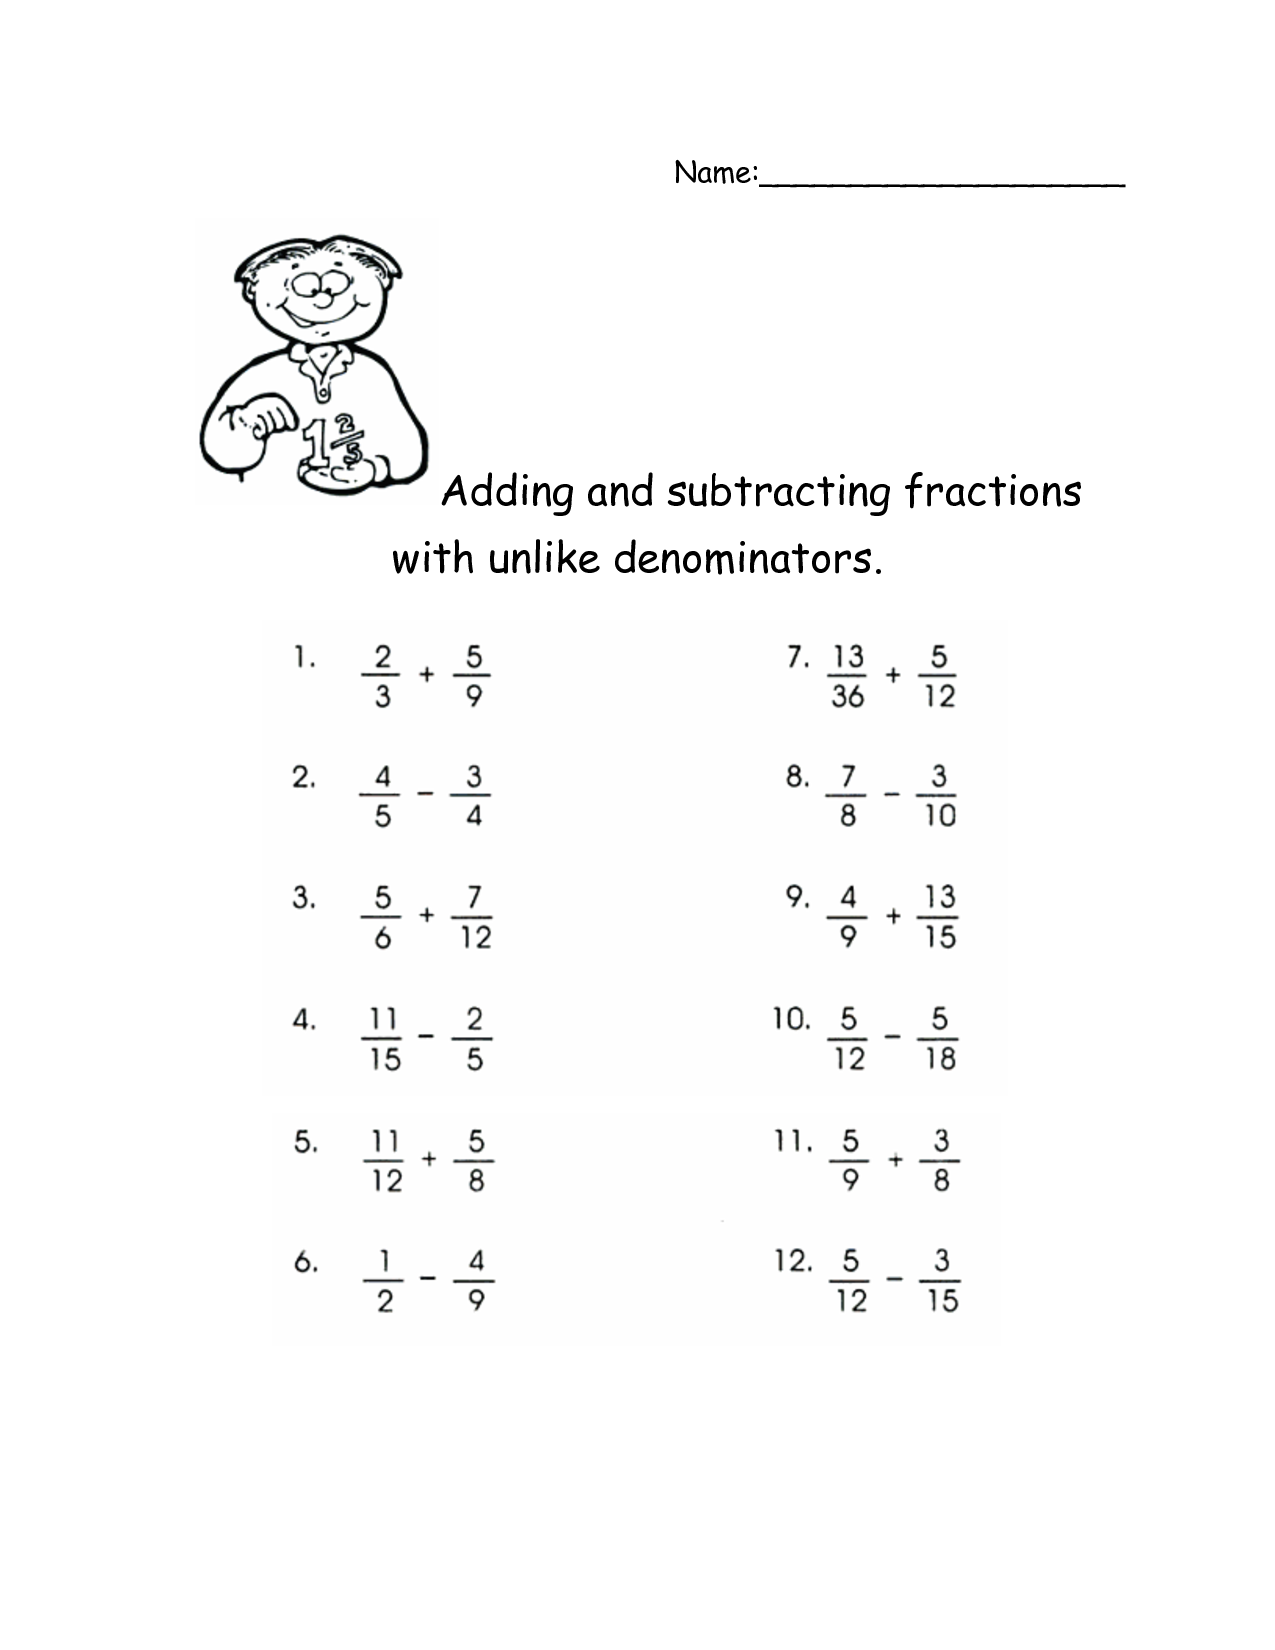 Free Printable Worksheets For Adding And Subtracting Fractions With Like Denominators